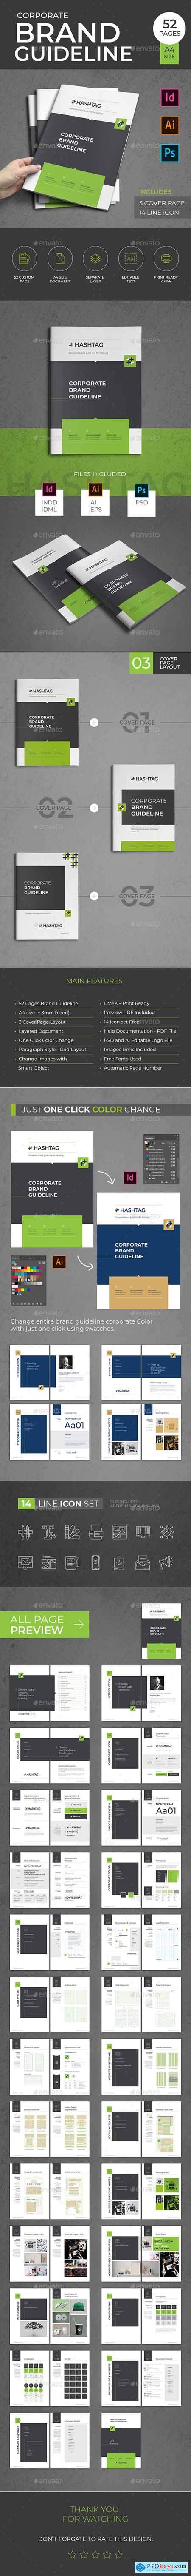 Corporate Brand Guidelines - Brand Manuals 27768180